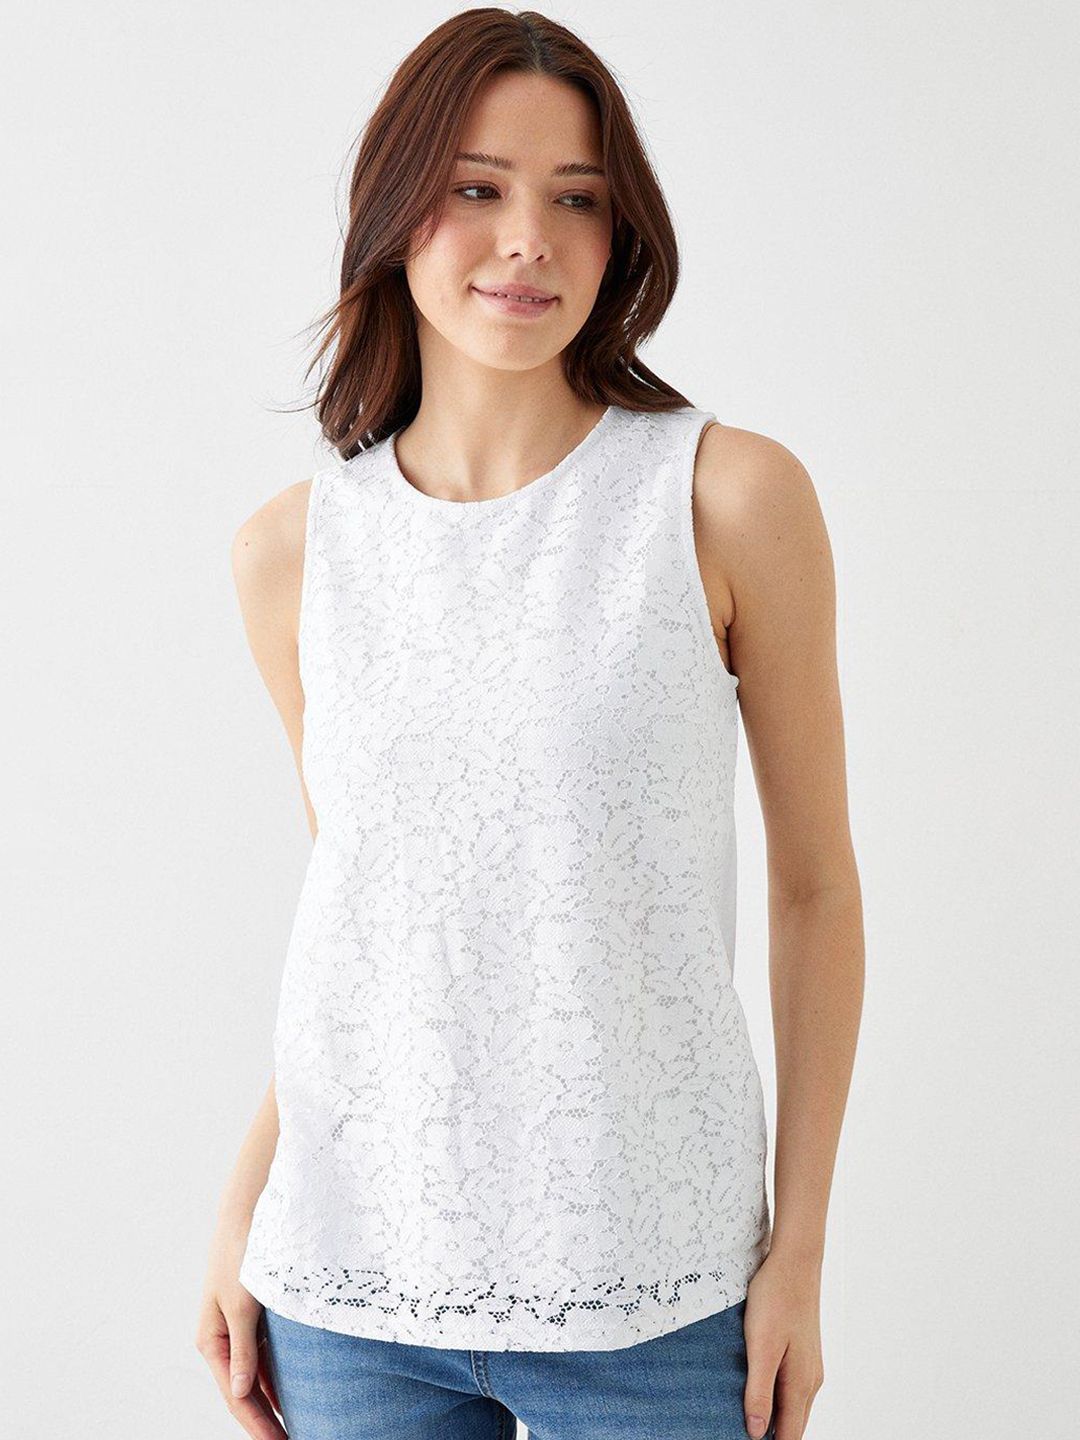 DOROTHY PERKINS Lace Inserts Top Price in India